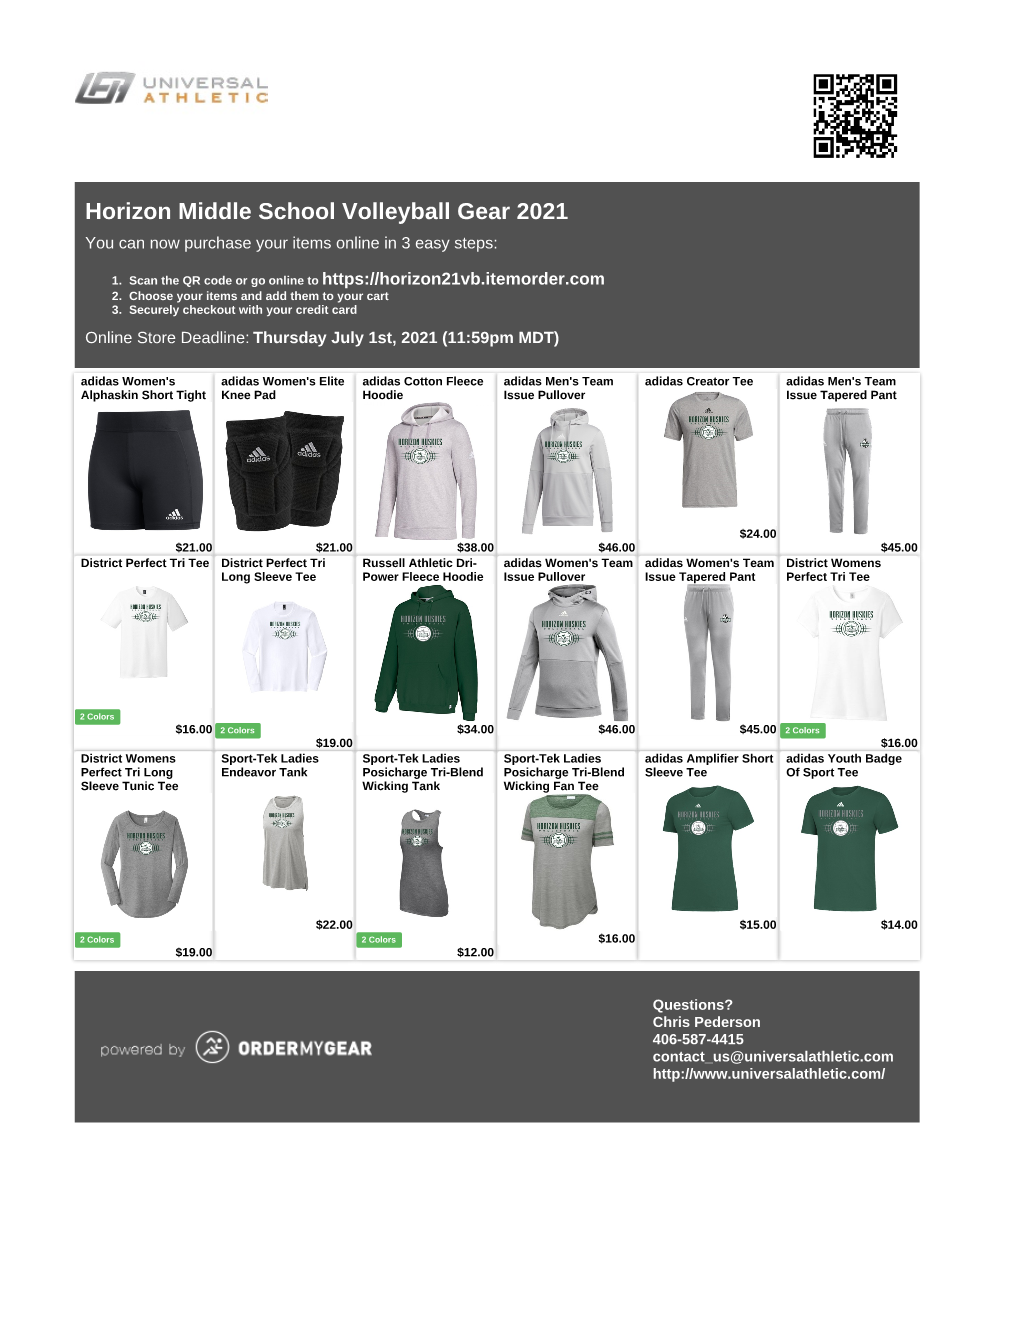 Horizon Middle School Volleyball Gear 2021 You Can Now Purchase Your Items Online in 3 Easy Steps